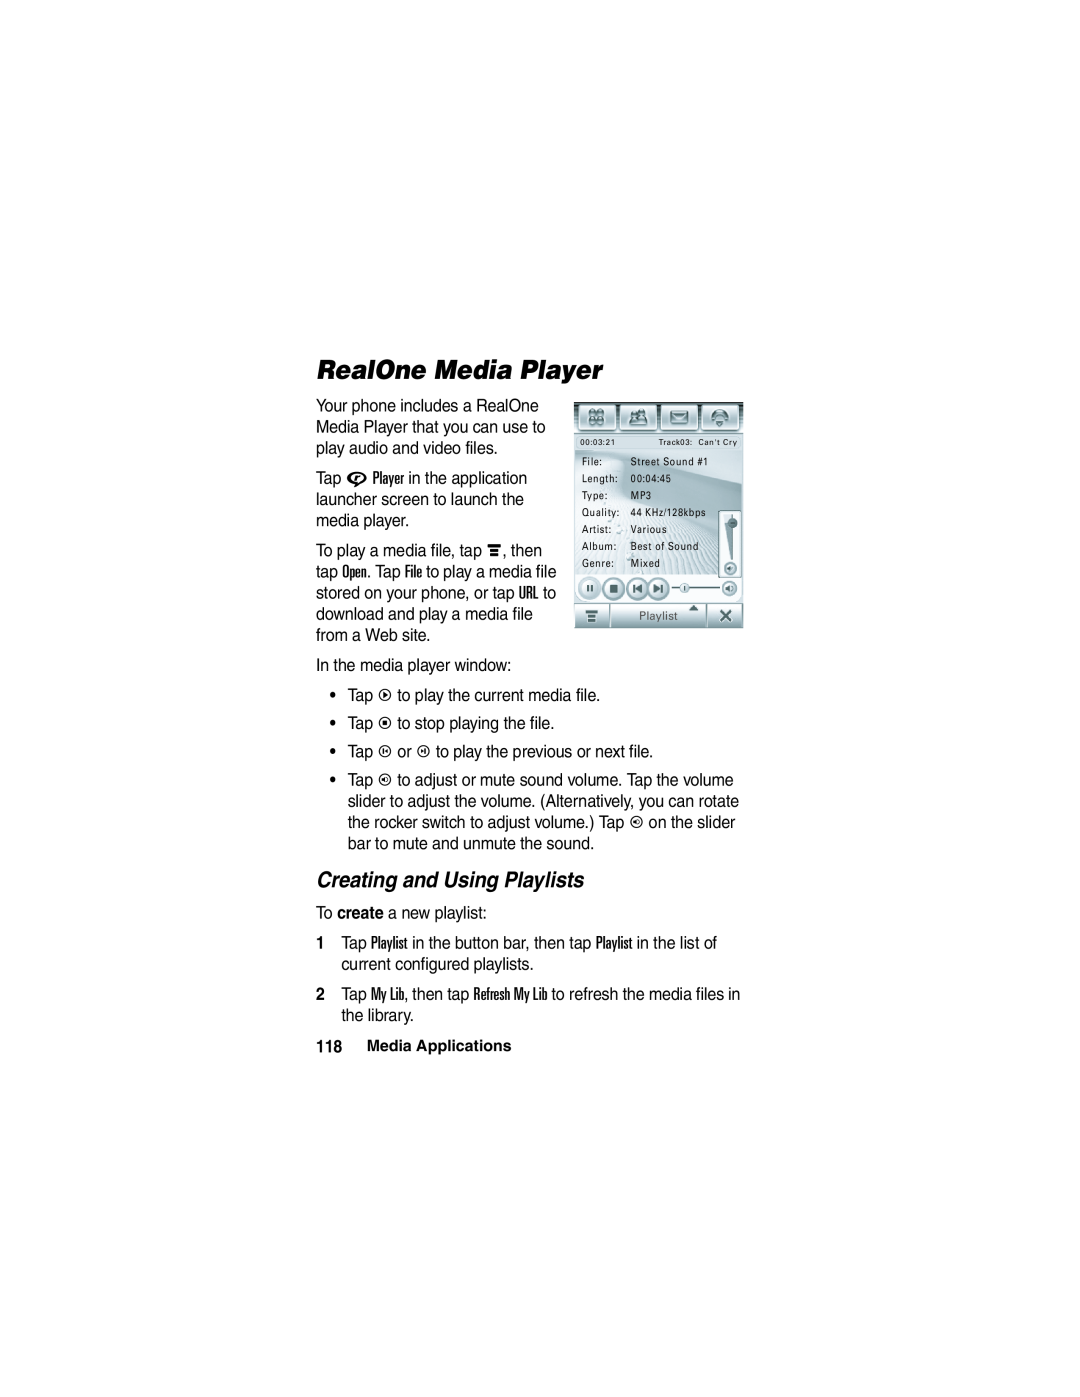 Motorola A780 manual RealOne Media Player, Creating and Using Playlists 